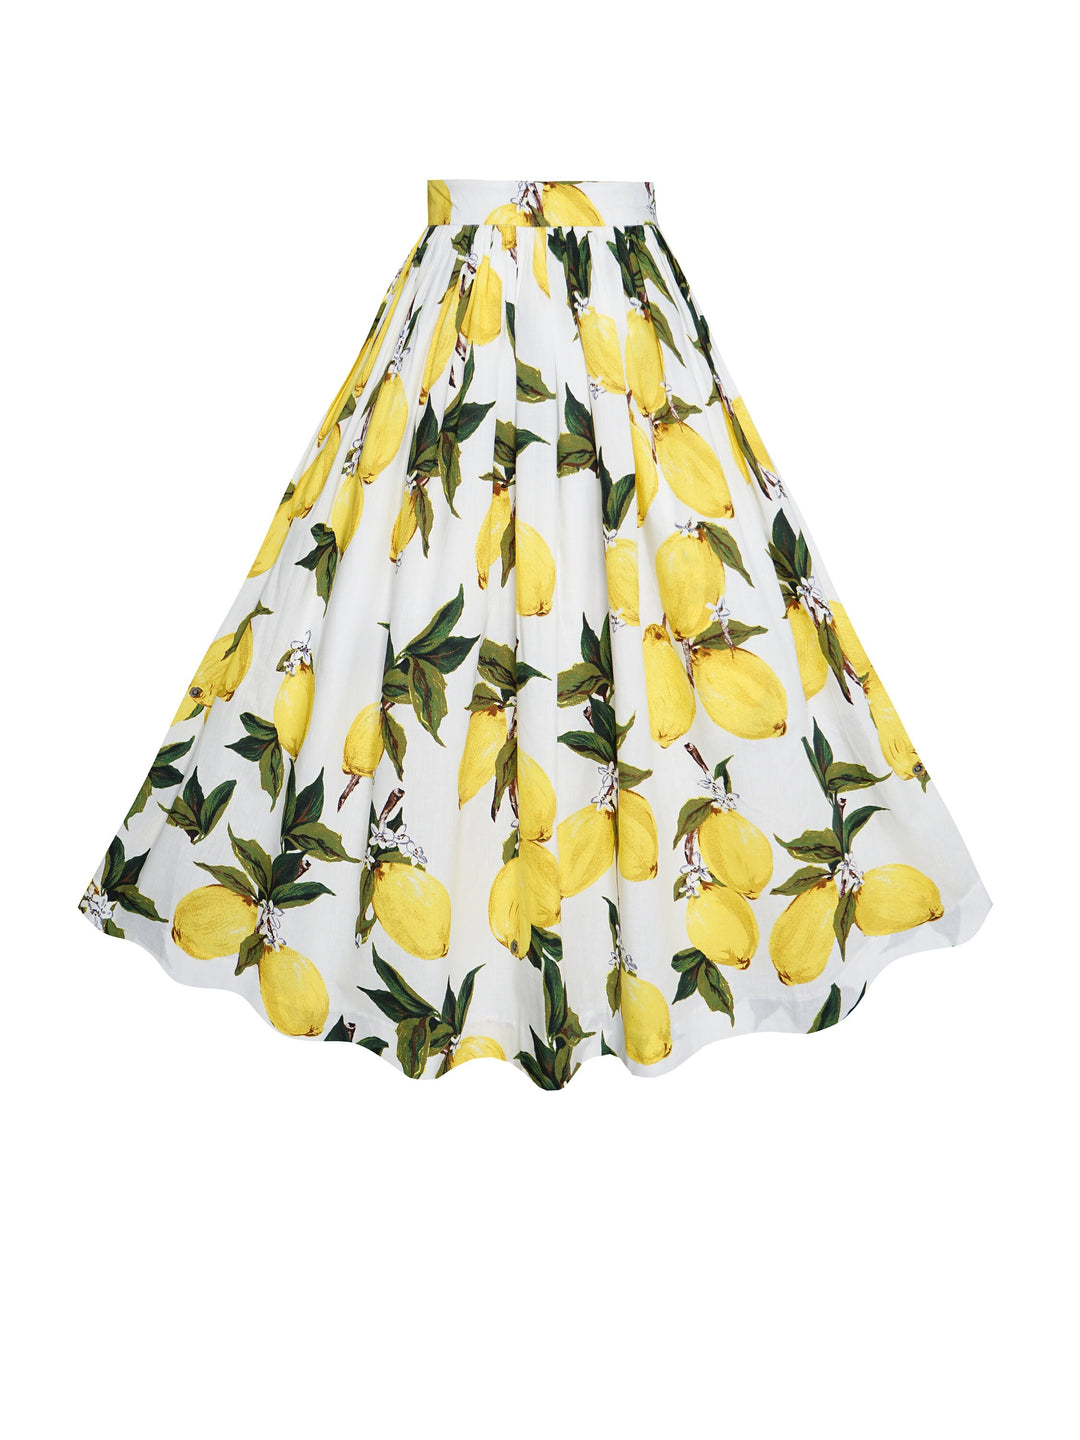 RTS - Size M - Lola Skirt in White "Freshly Squeezed"